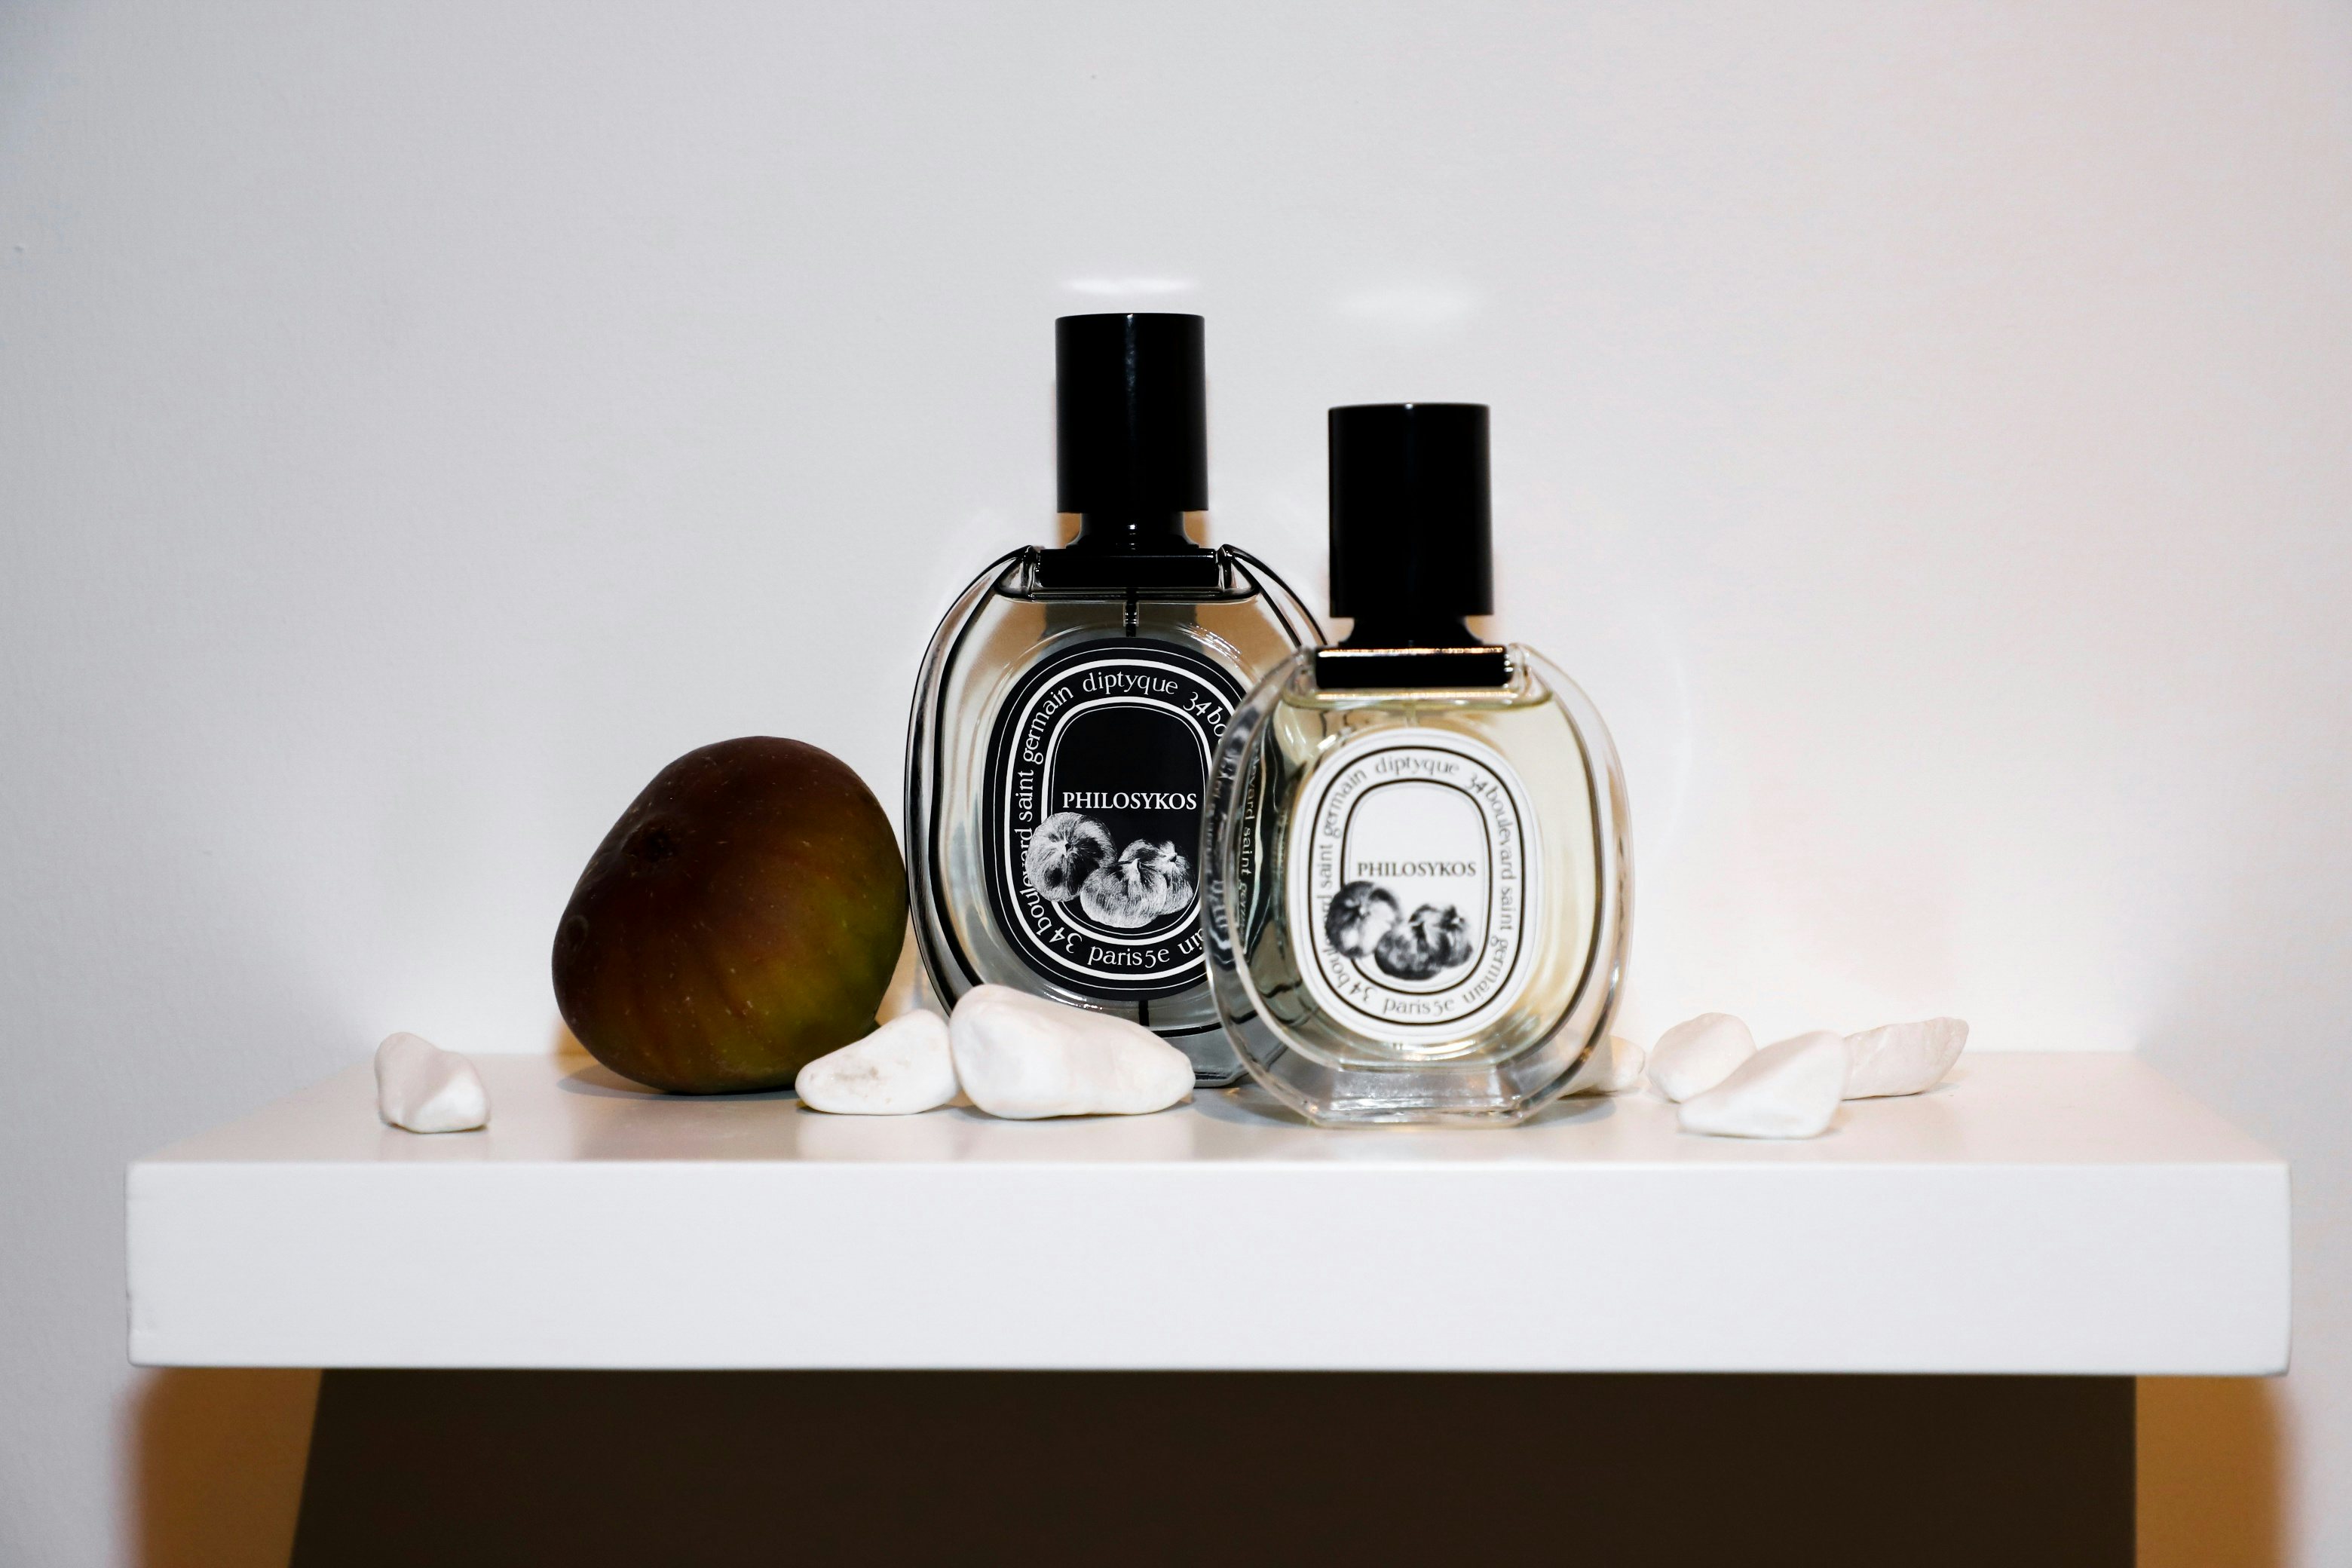 These days, blemish balm cream and facial masks have become commonplace in the Chinese man's beauty routine, yet perfume has remained a relatively silent category. Photo: Diptyque
